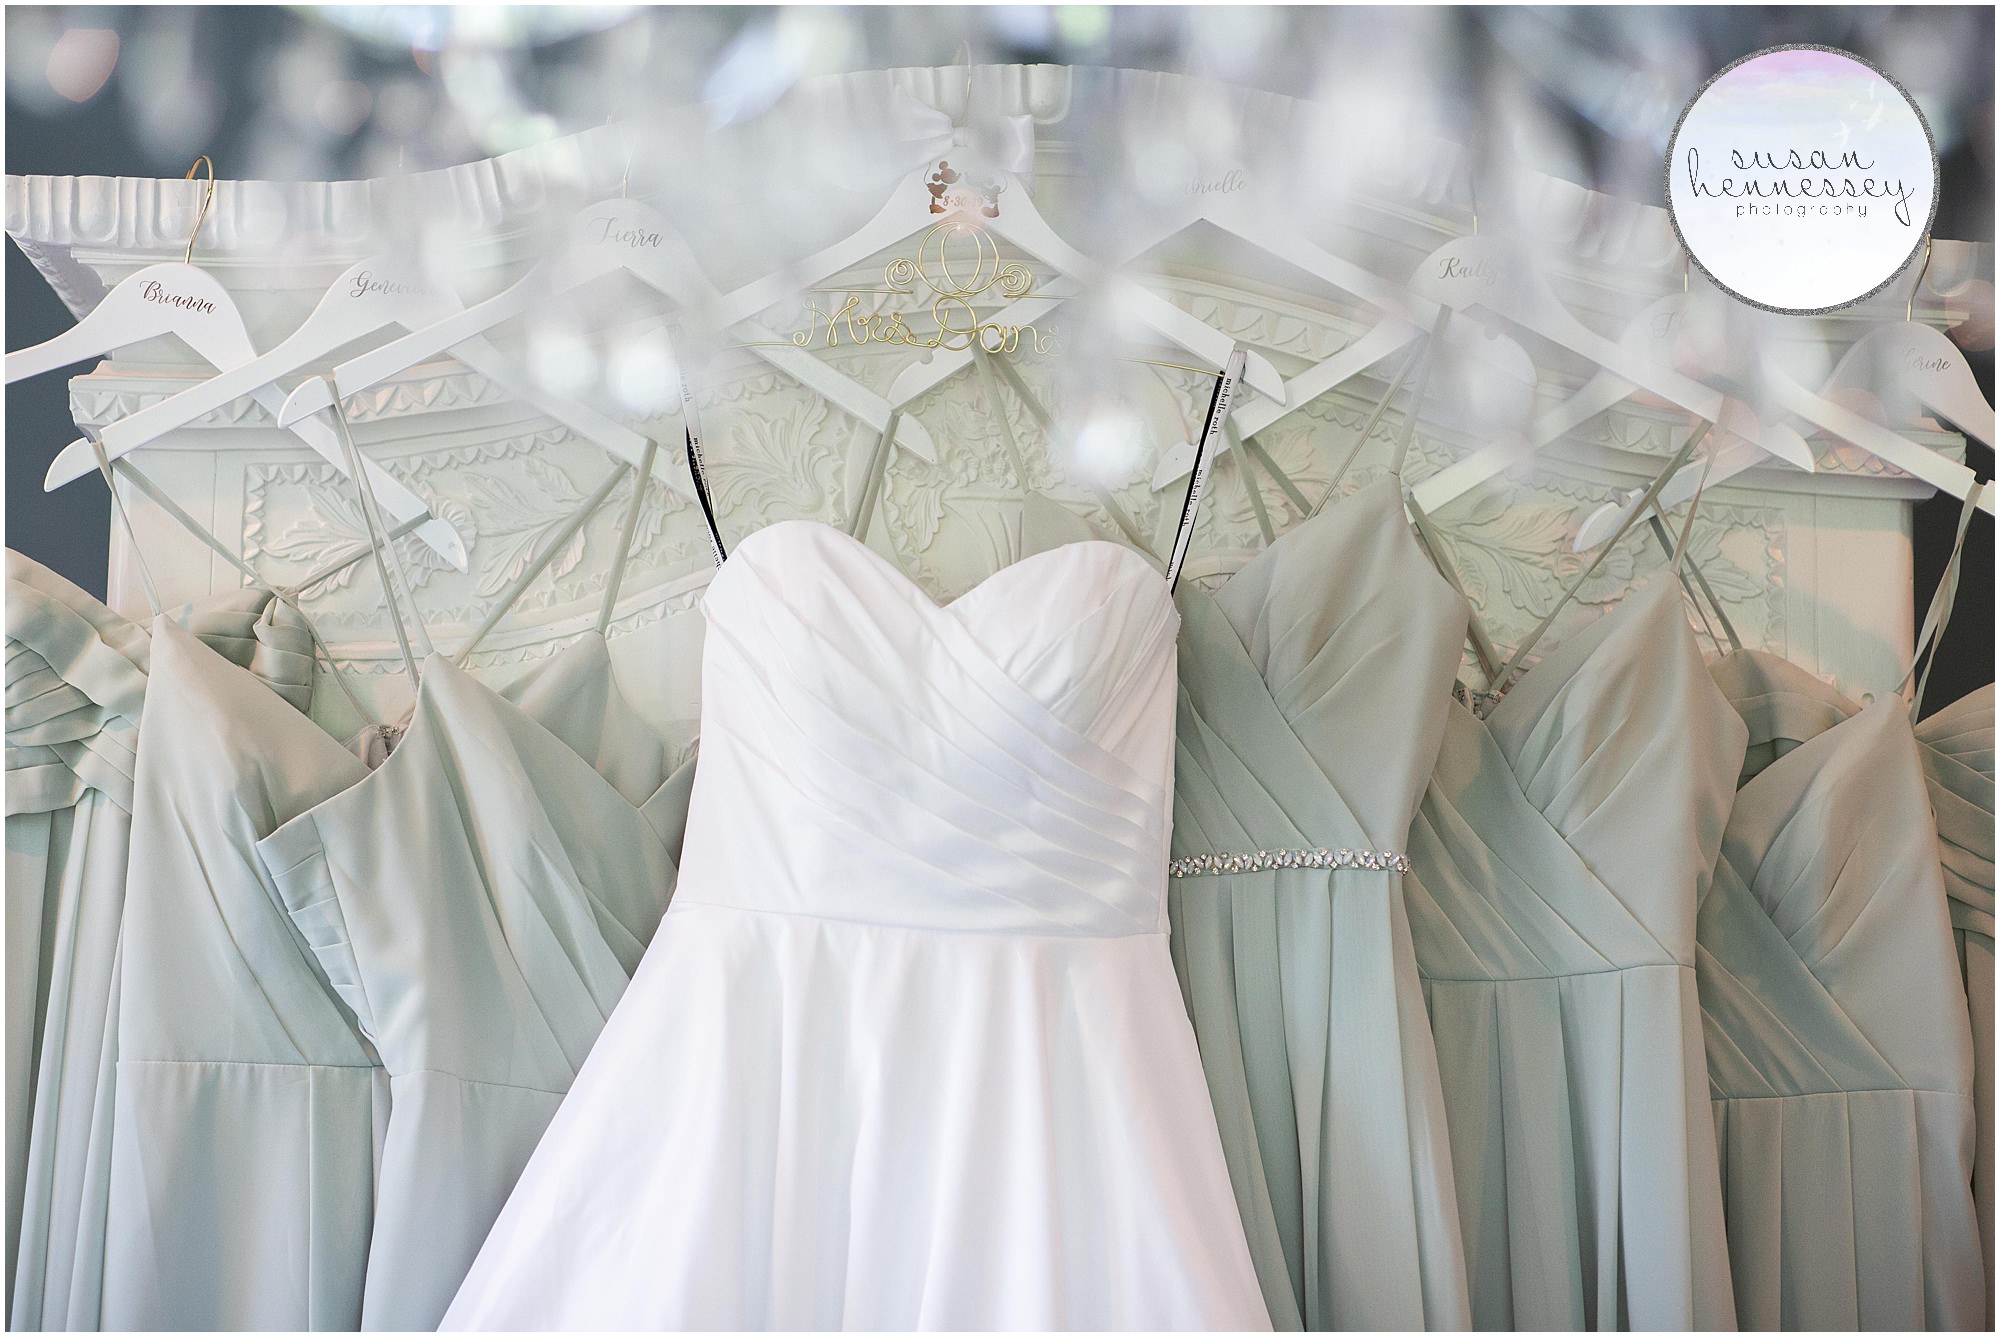 Bridal gown and bridesmaid dresses hanging